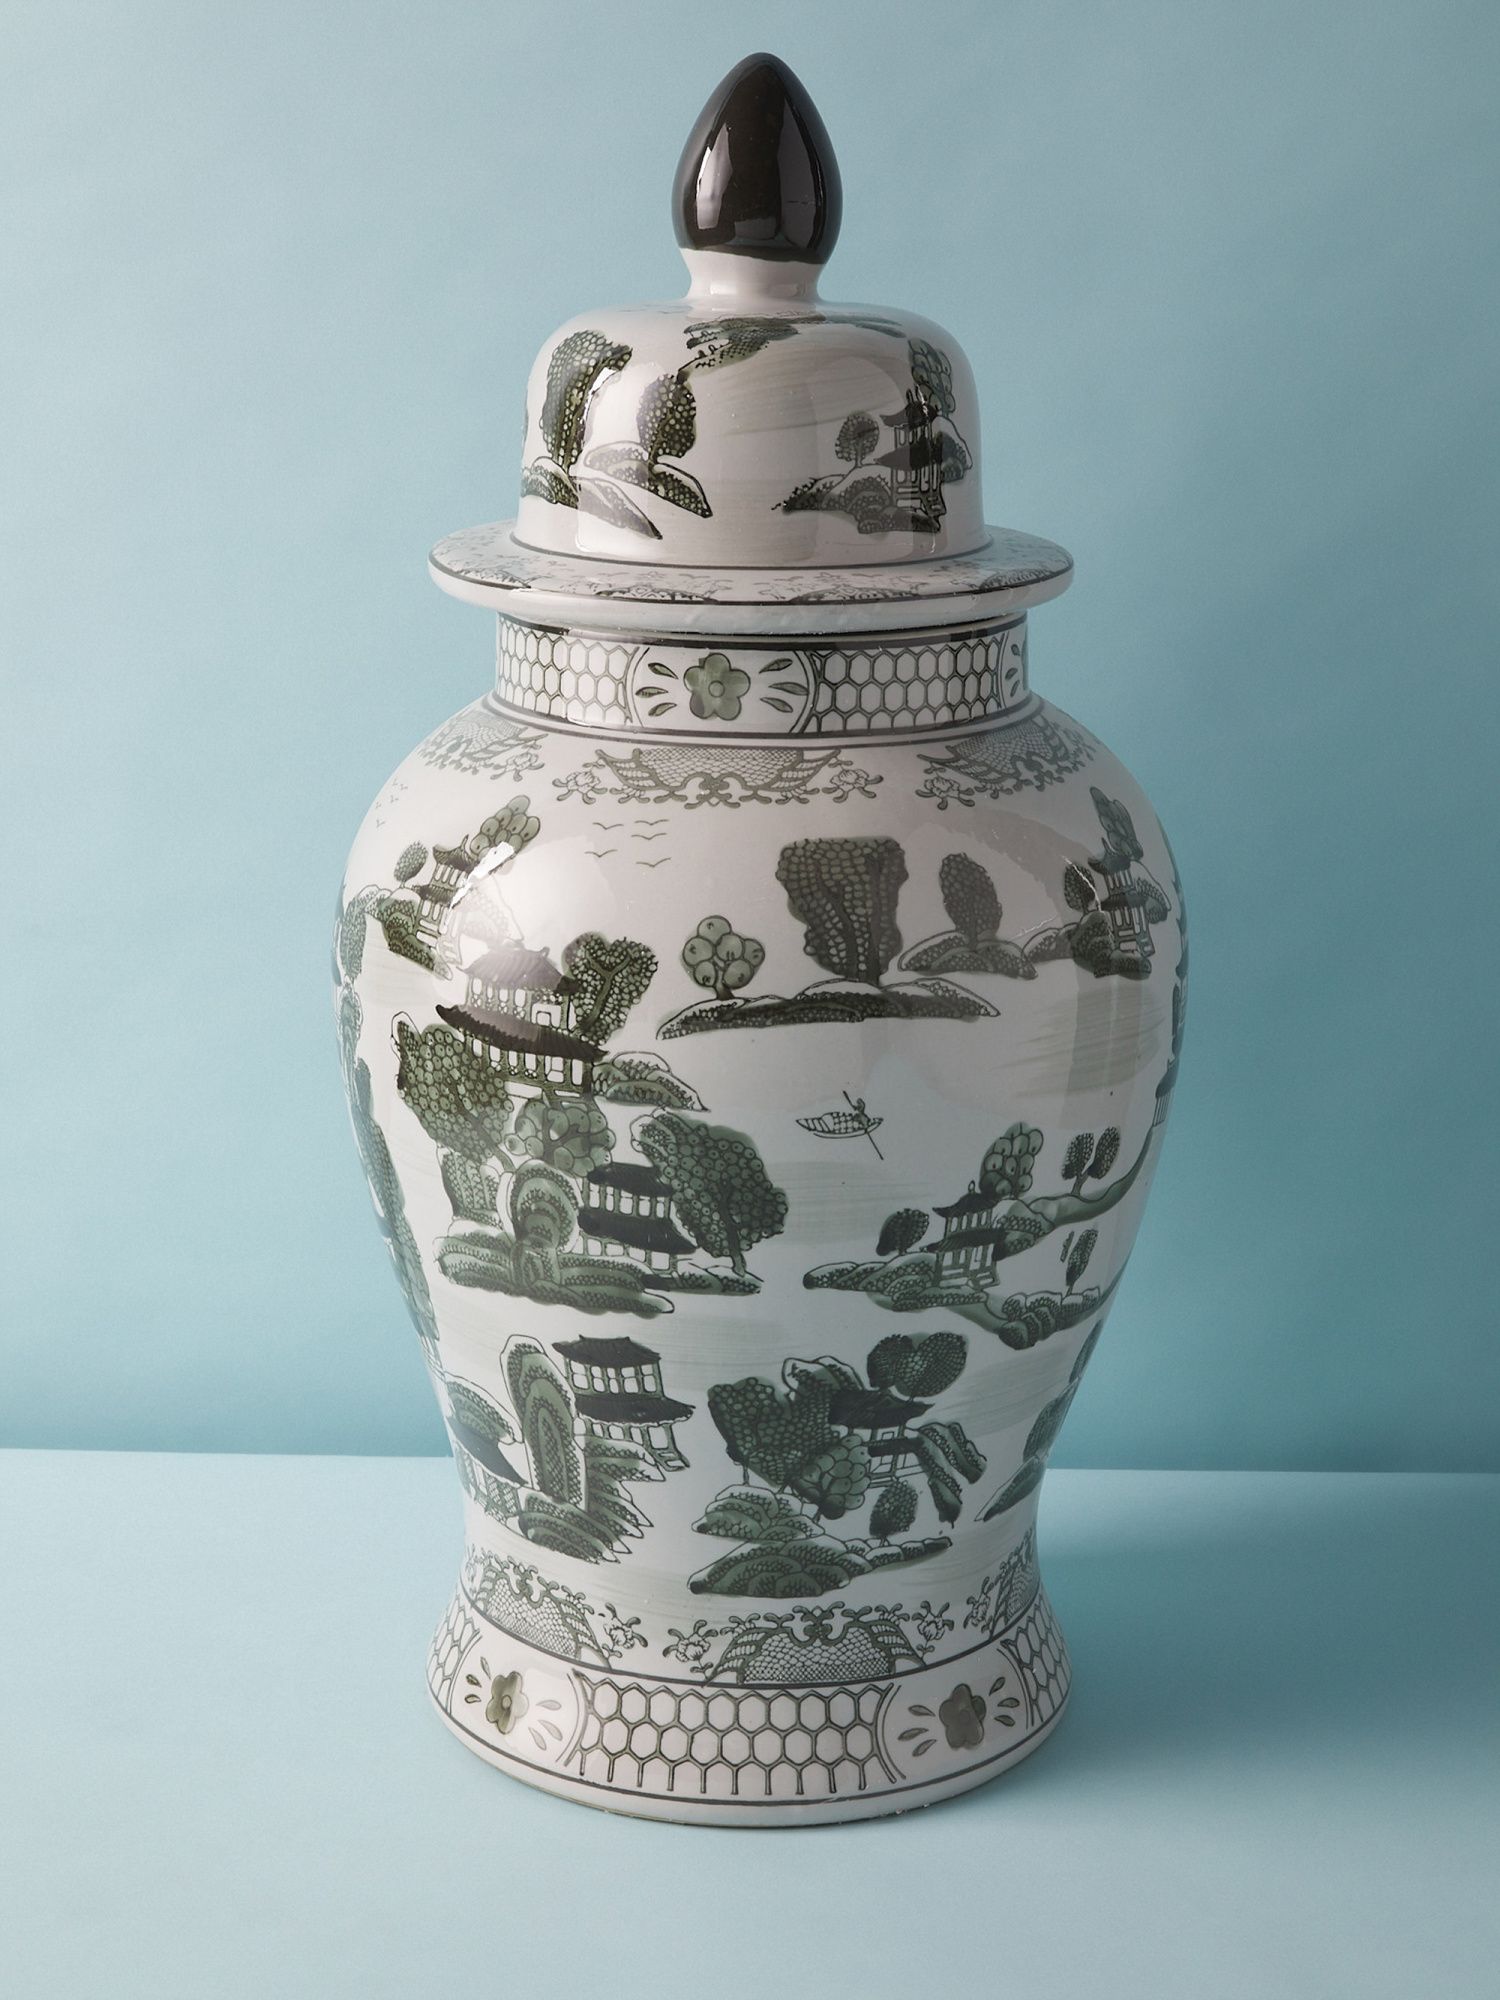 25in Ceramic Chinoiserie Ginger Jar | Decorative Objects | HomeGoods | HomeGoods